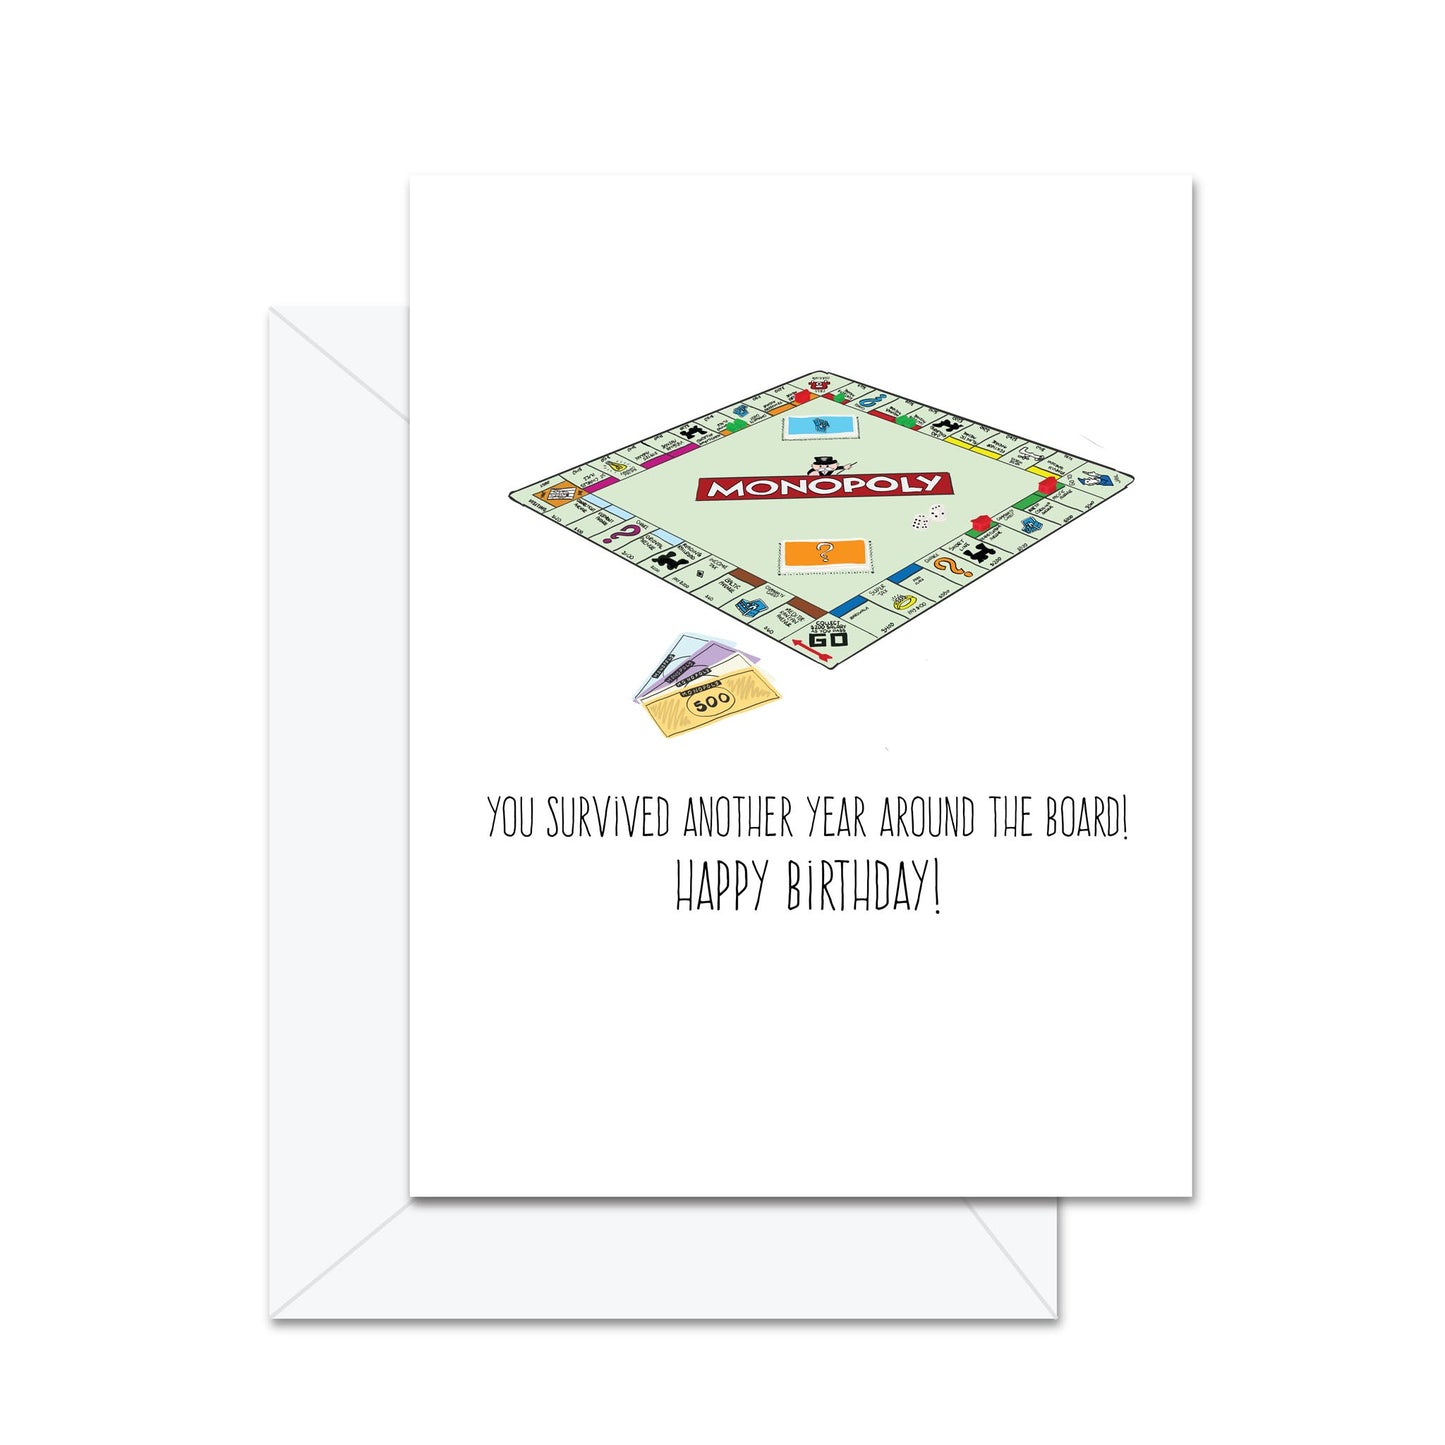 You Survived Another Year Around The Board! Happy Birthday! - Greeting Card